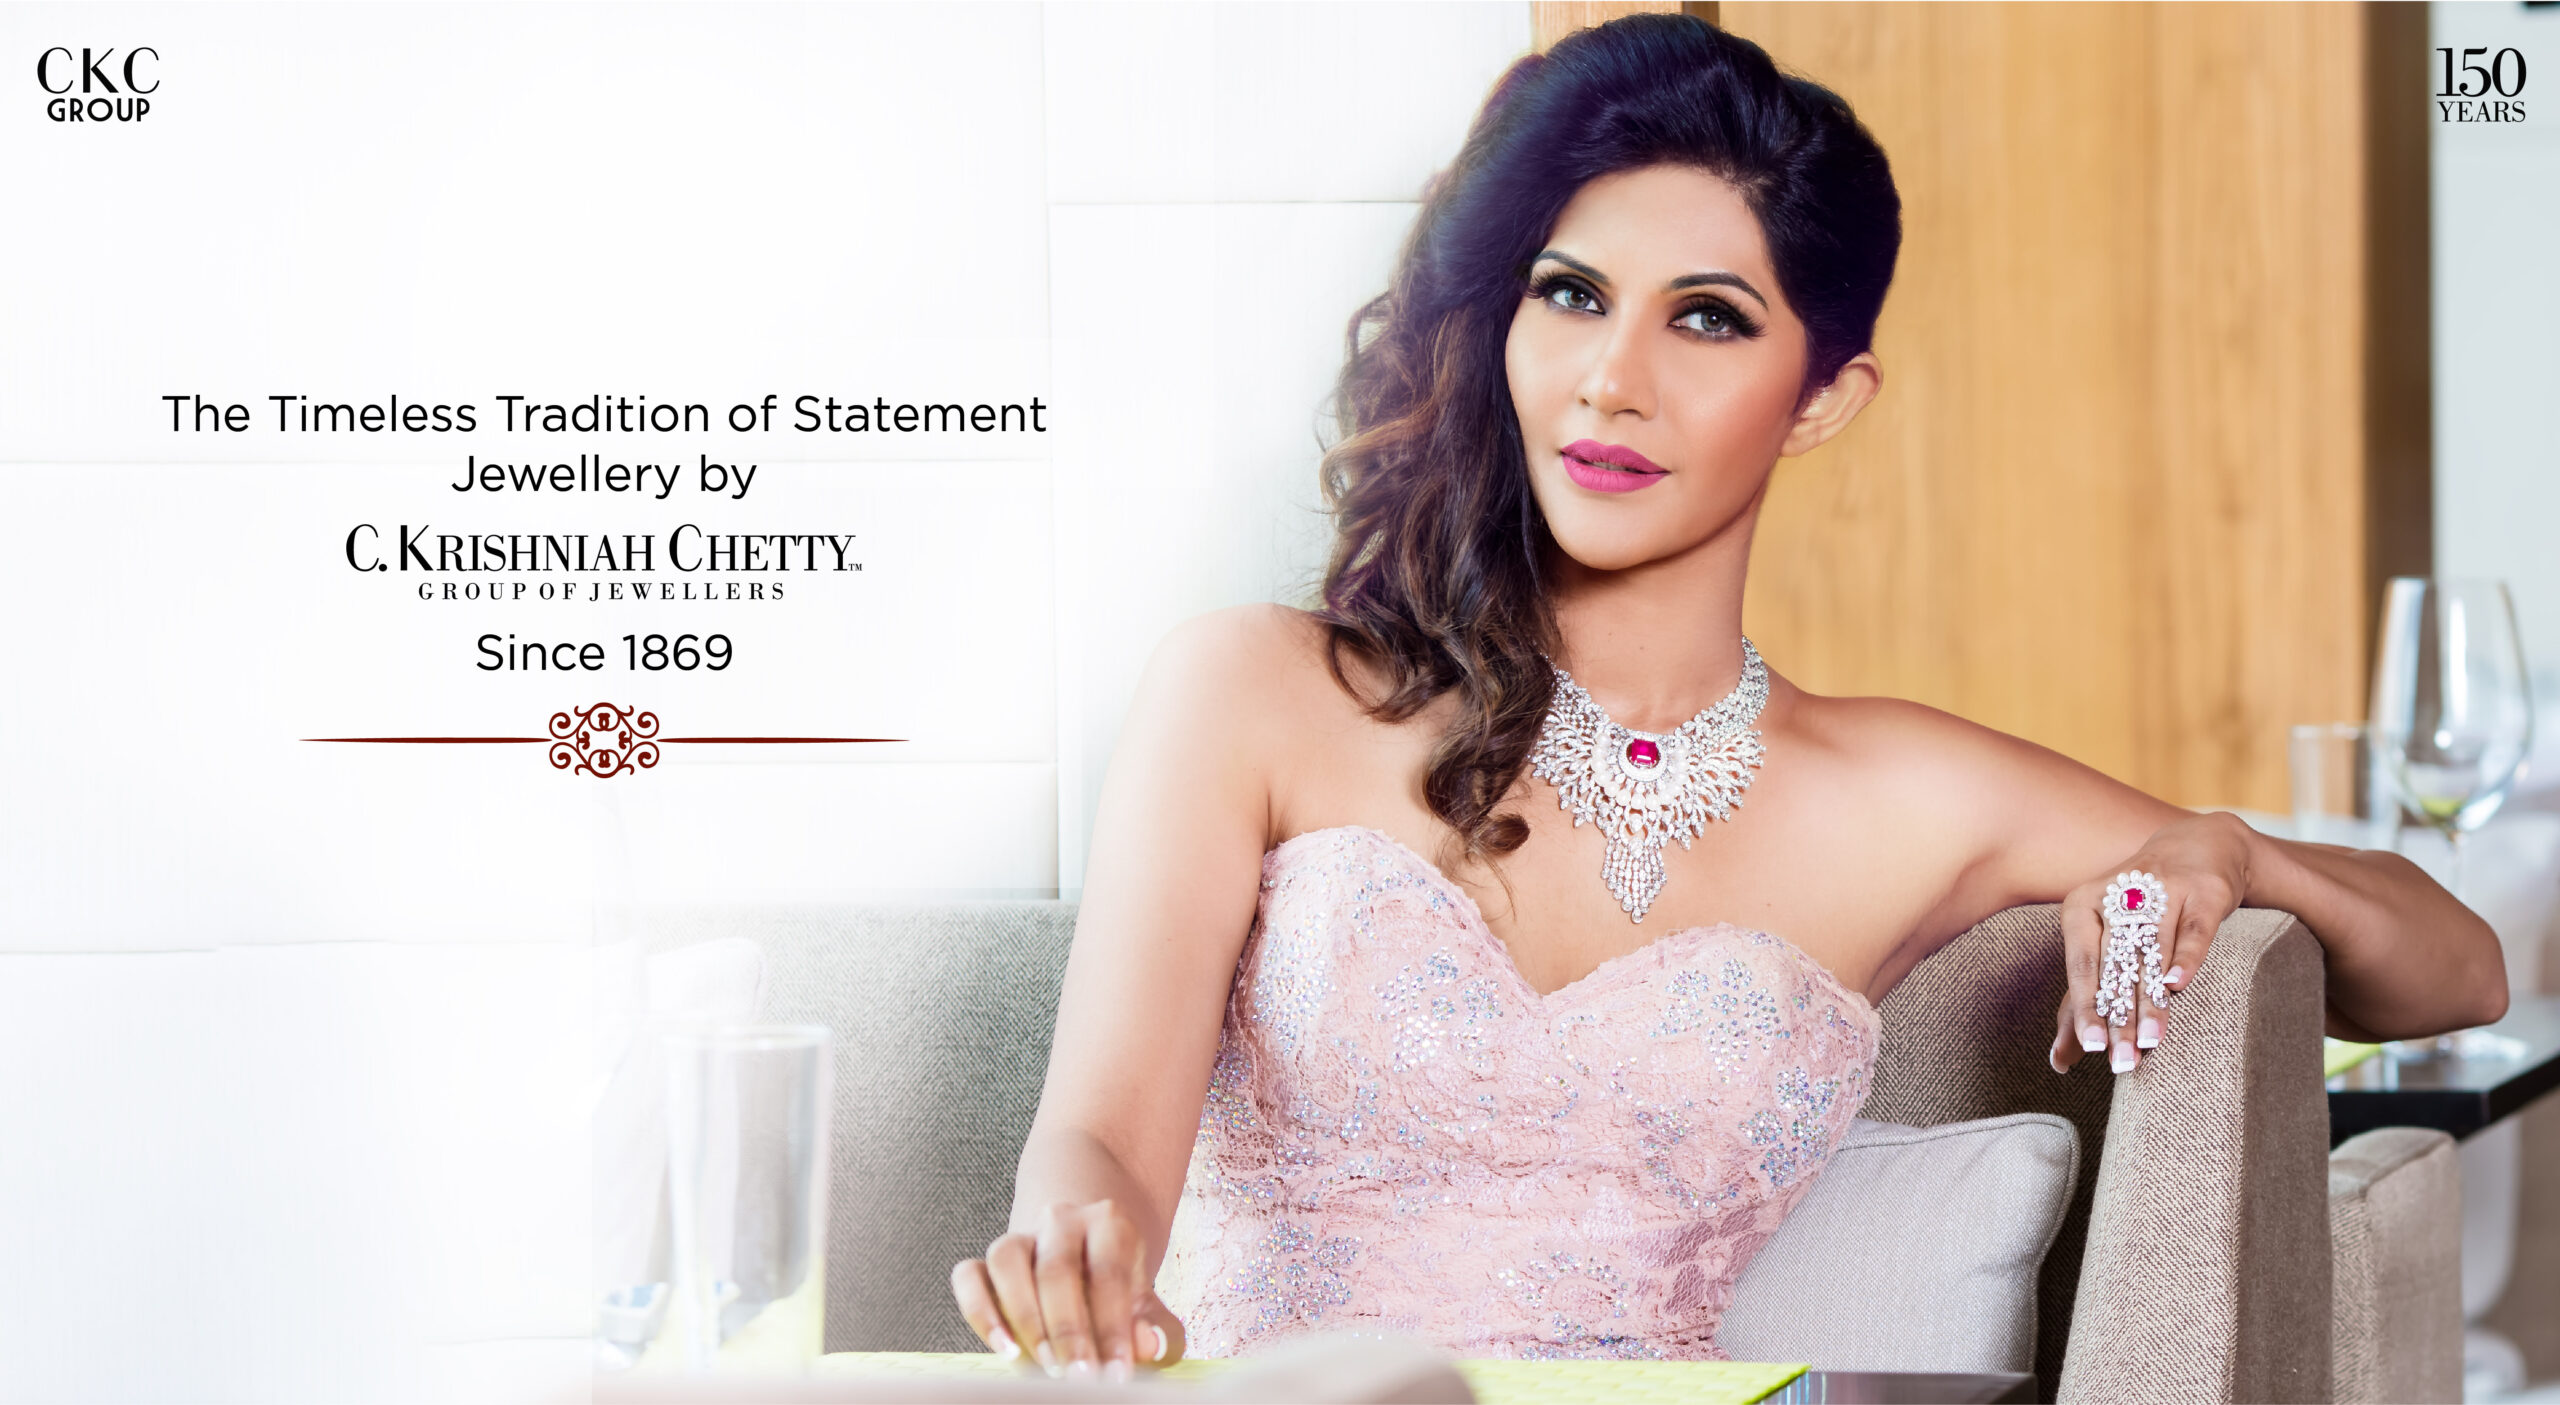 The Timeless Tradition of Statement Jewellery by C Krishniah Chetty Since 1869